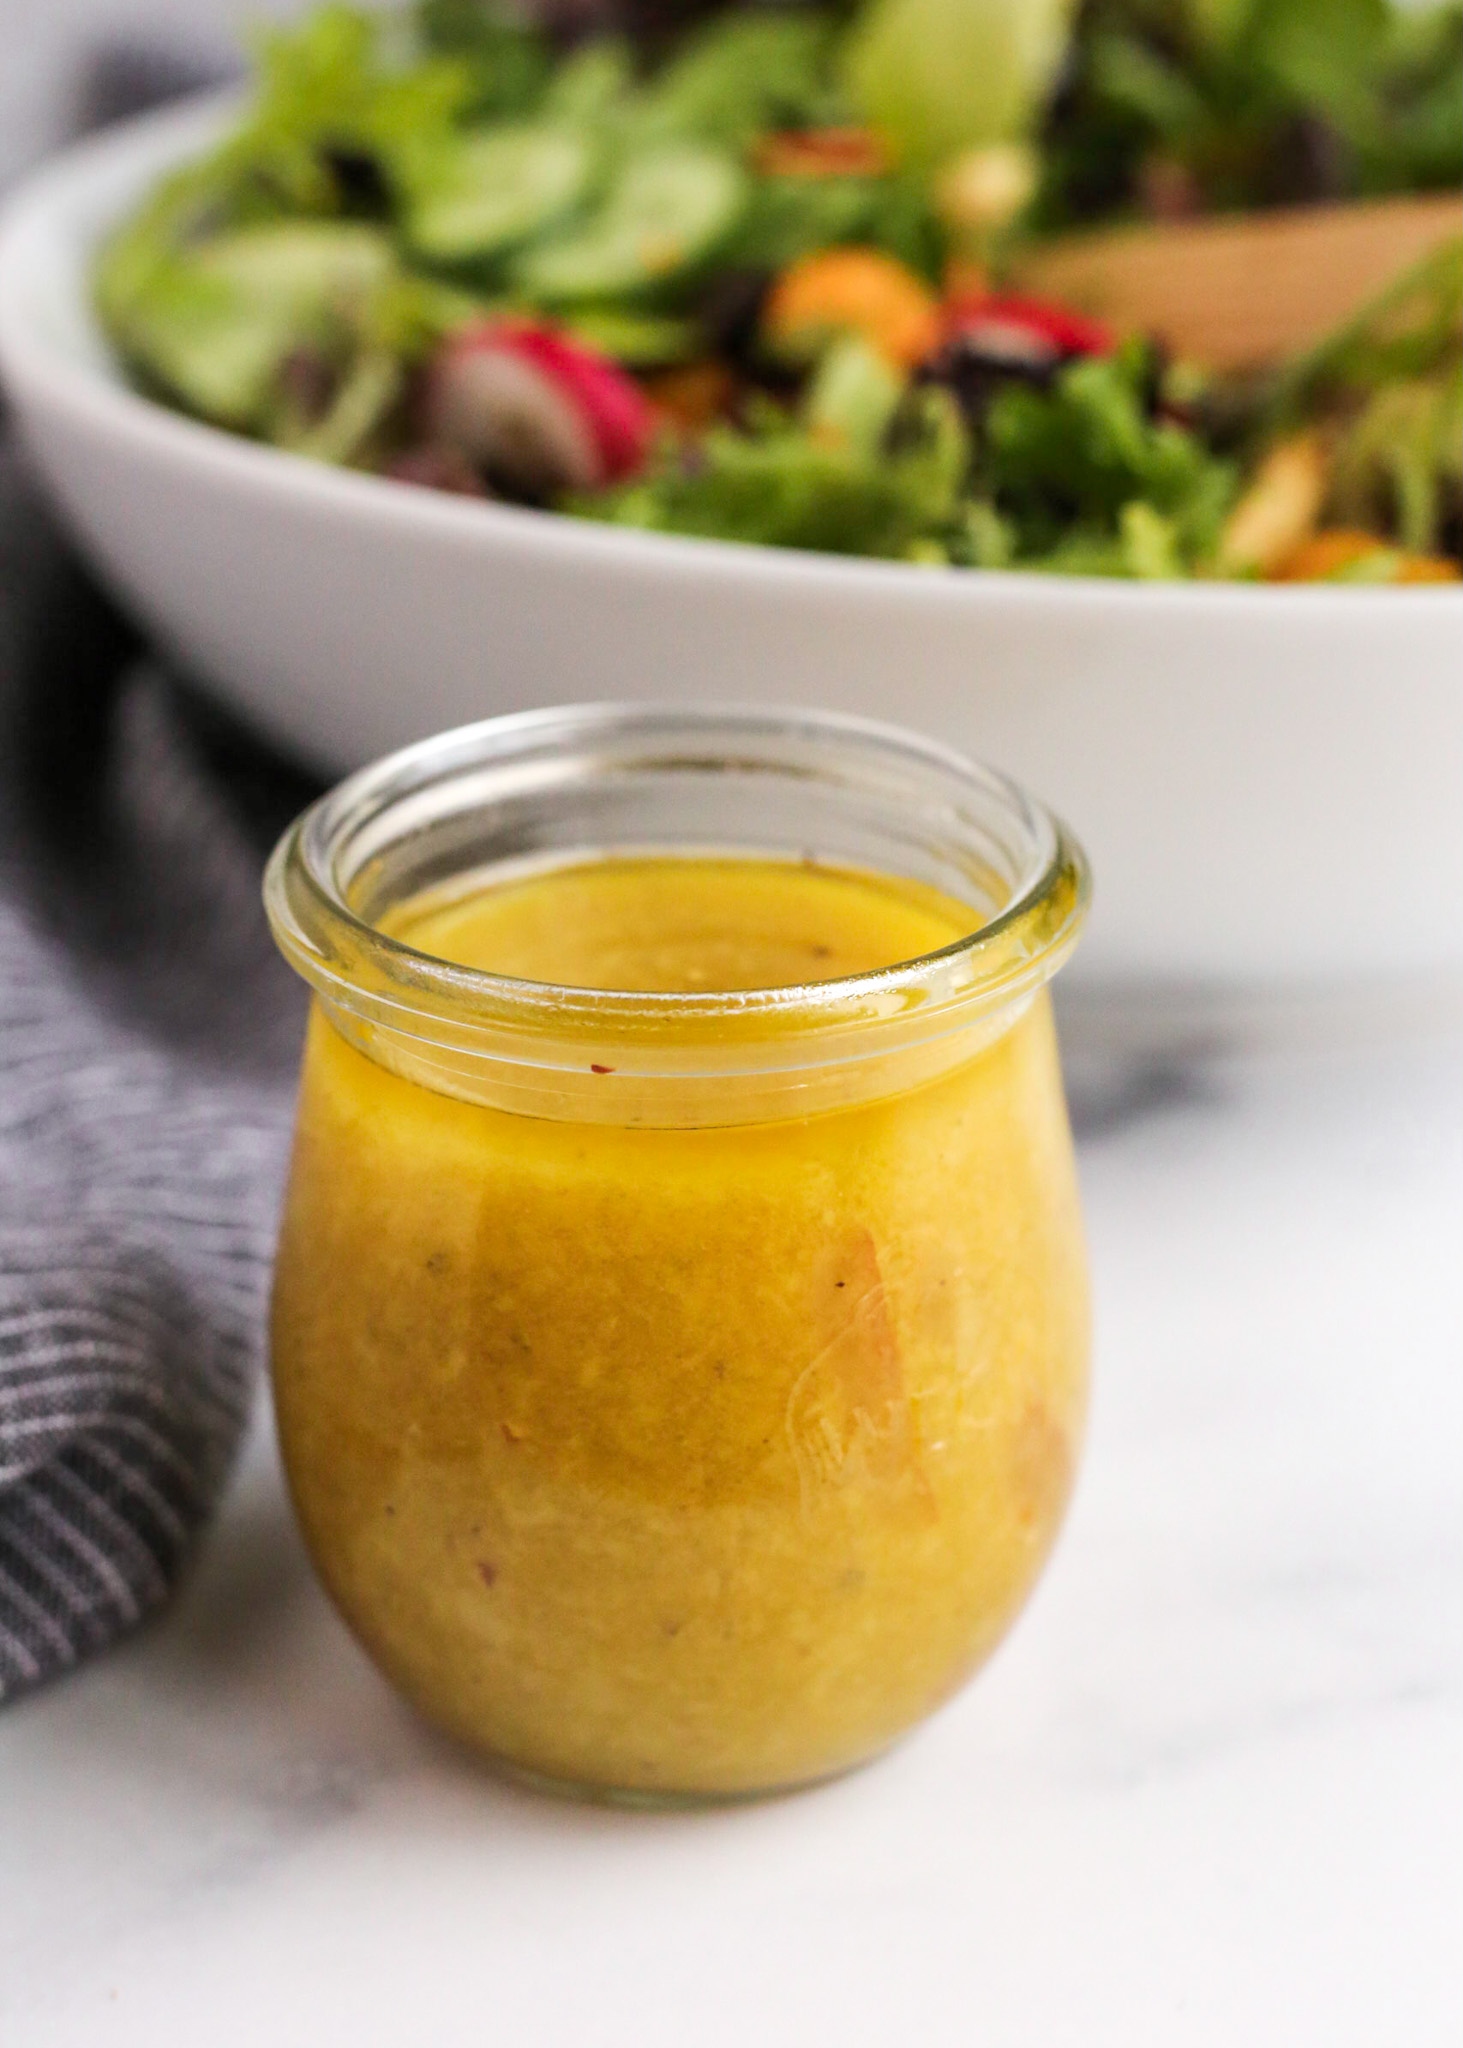 A close view of a small glass jar with a yuzu salad dressing inside, displayed on a kitchen countertop with a mixed greens salad visible in the background